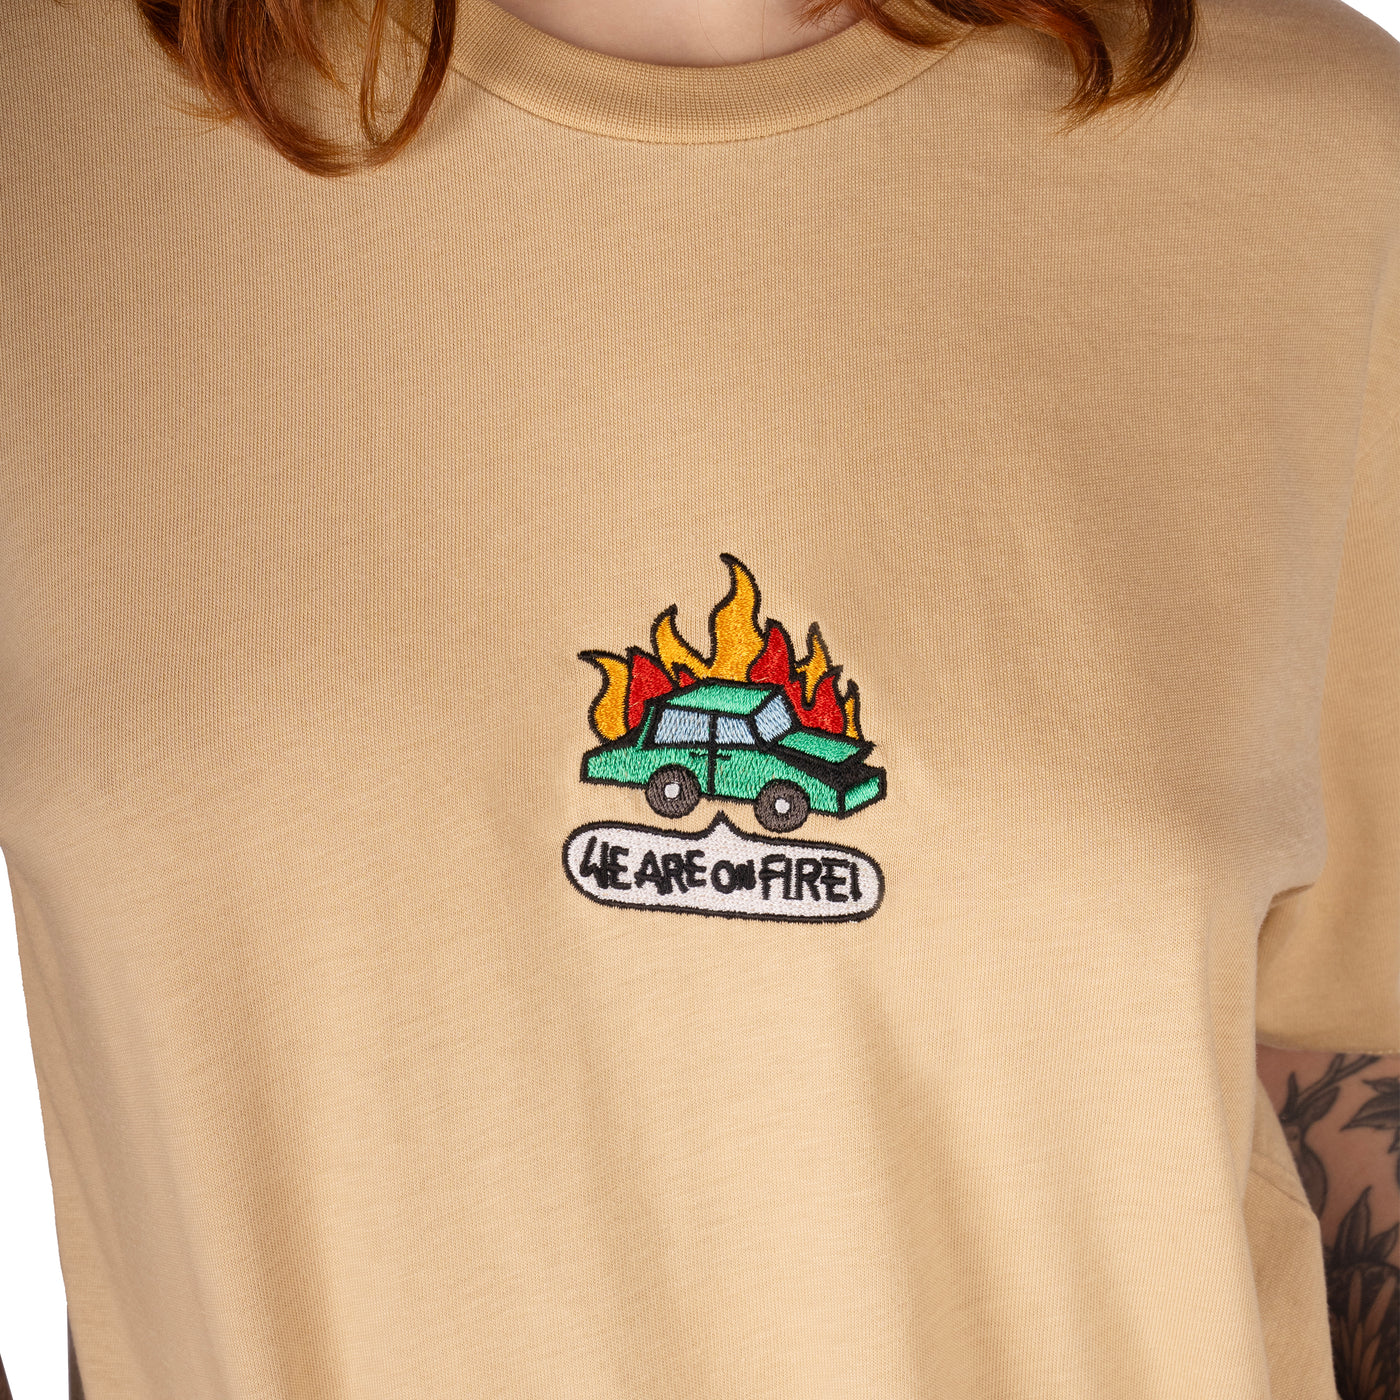 We are on fire - Tシャツ